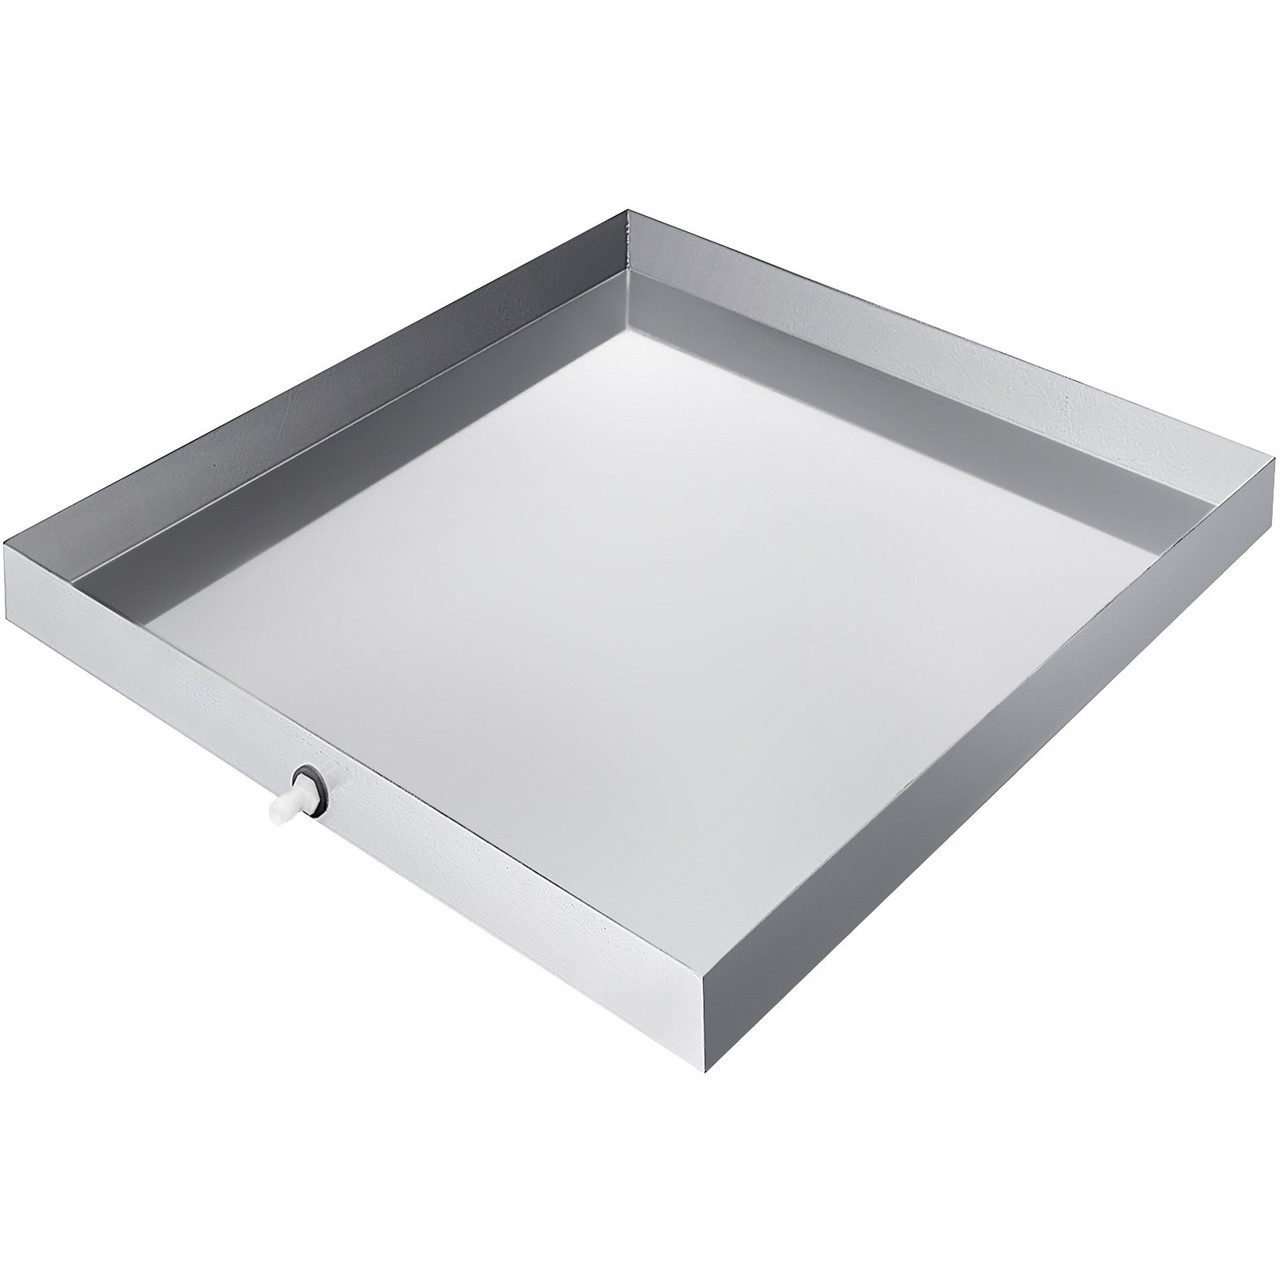 32 x 30 x 2.5 Inch Washing Machine Pan 18 GA Thickness Galvanized Steel Heavy Duty Compact Washer Drip Tray with Drain Hole & Hose Adapter